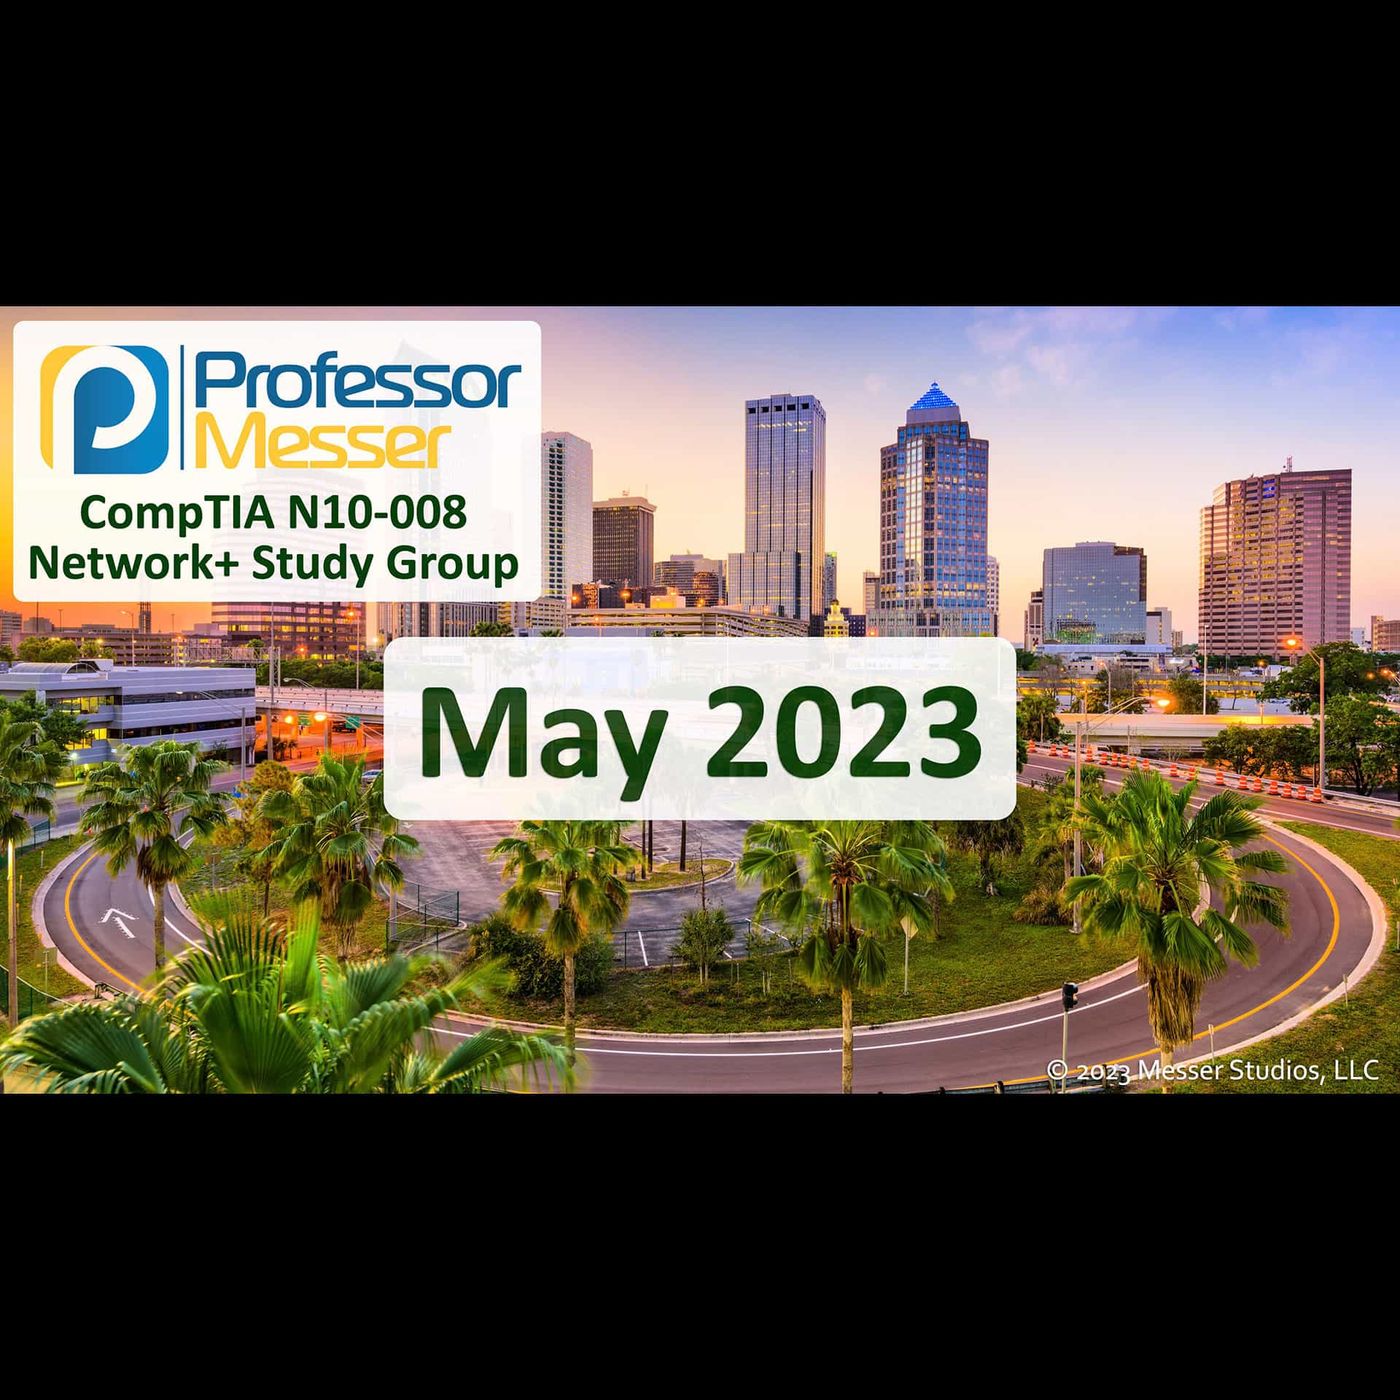 Professor Messer's N10-008 Network+ Study Group - May 2023